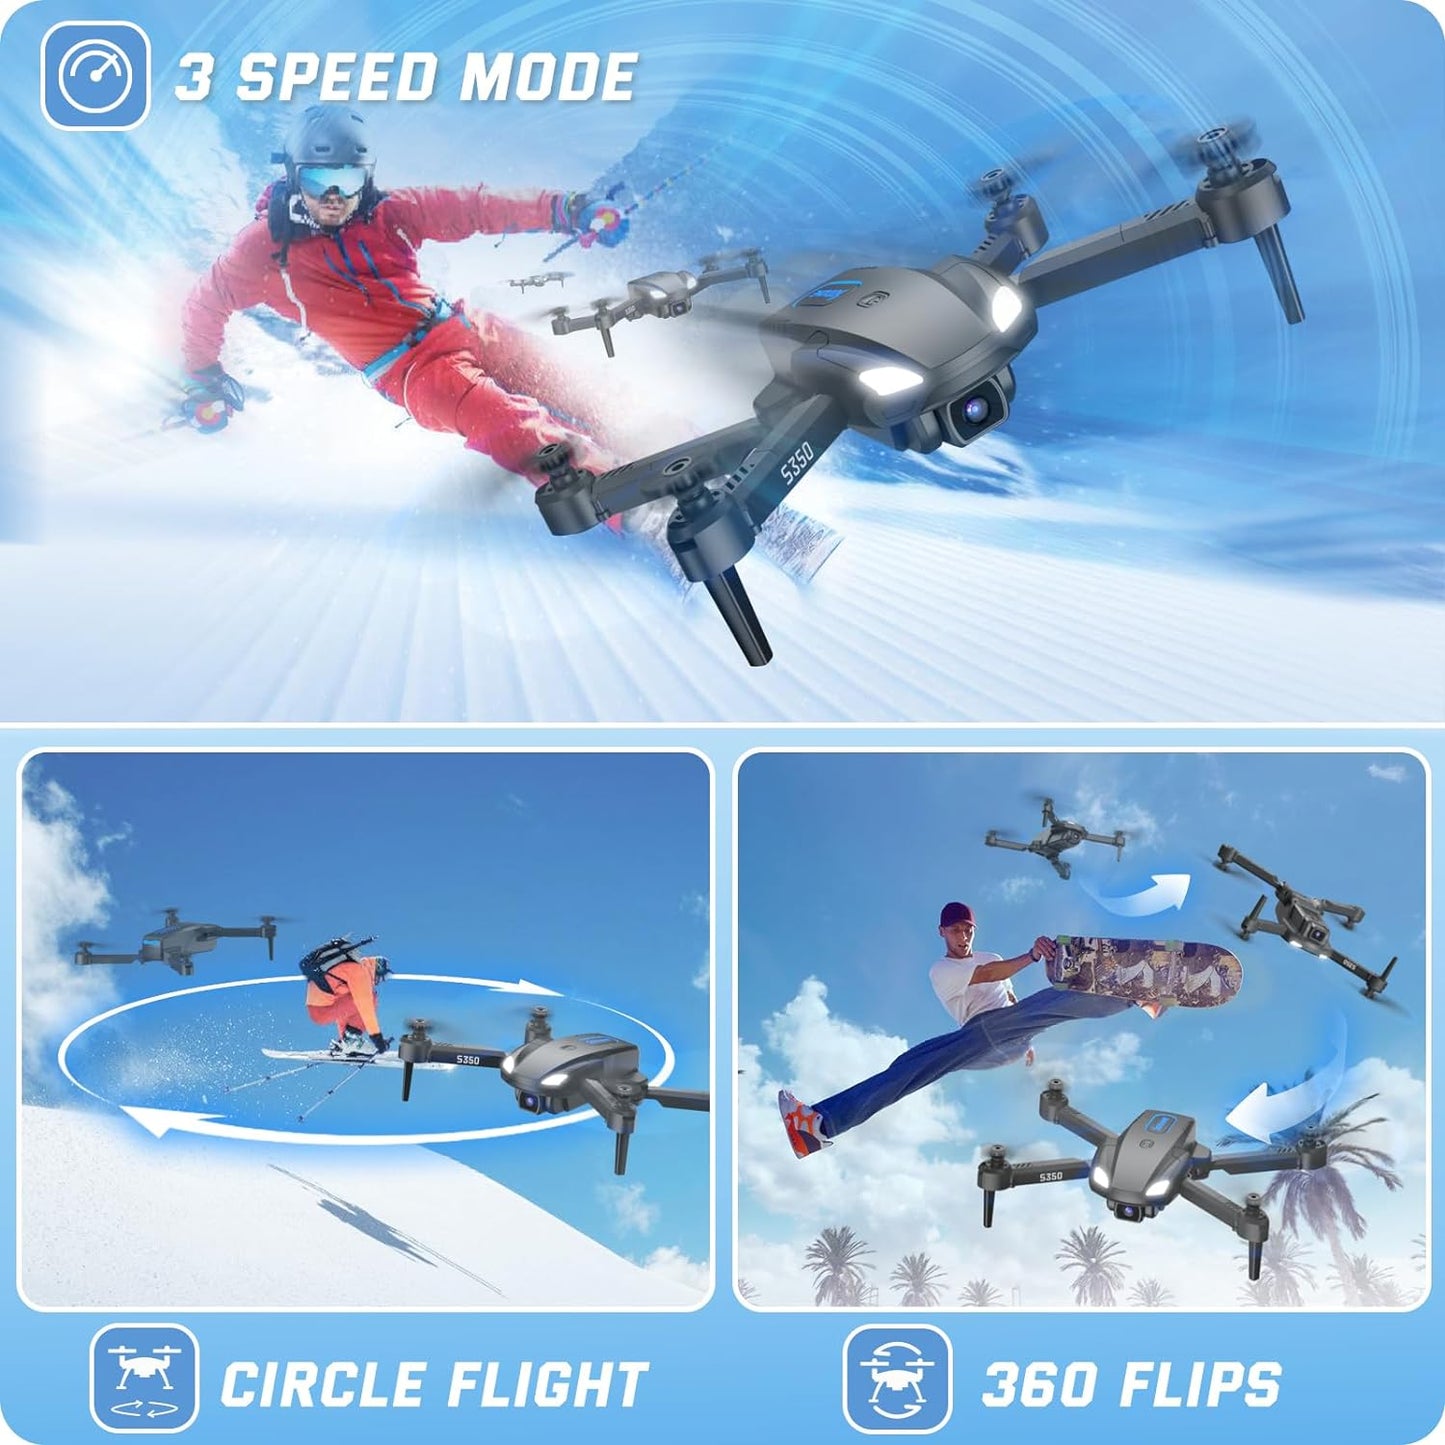 SOTAONE S350 Drone -  1080P HD FPV Live Video, Remote Control Helicopter Toys Gifts for Boys Girls, Altitude Hold, One Key Start, 3D Flips, 2 Batteries